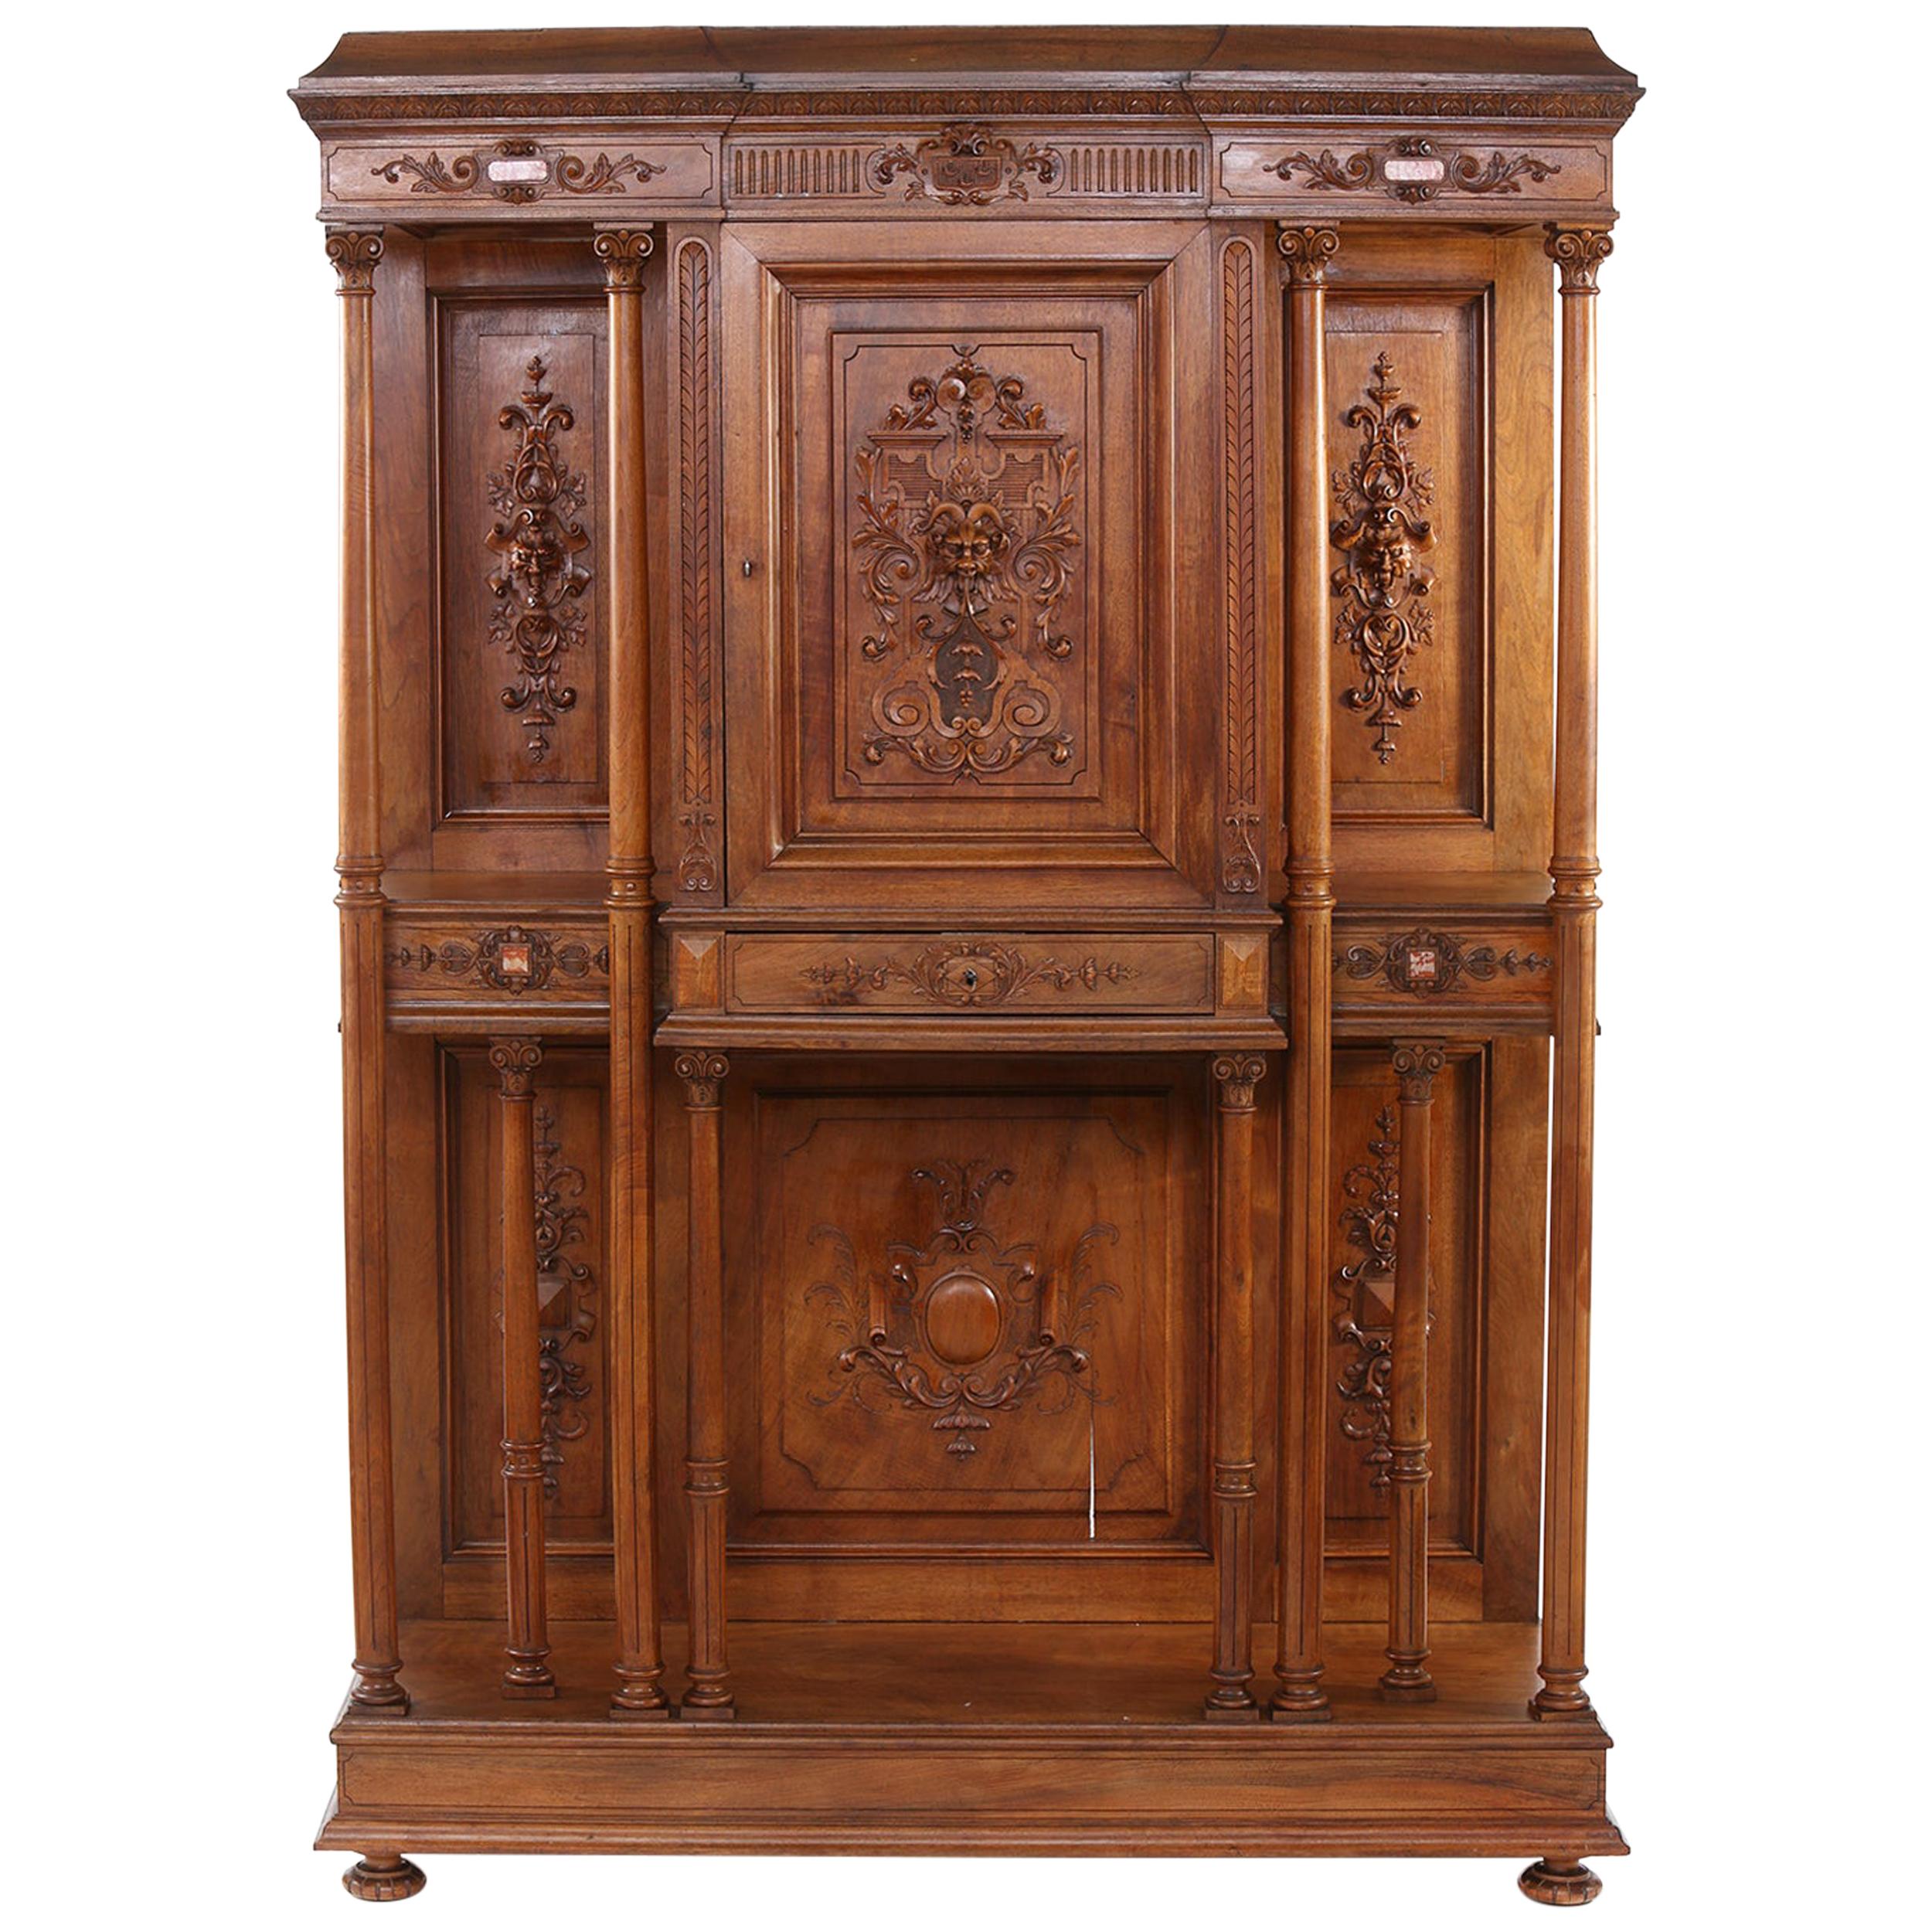 19th Century French Renaissance Revival Display Cabinet